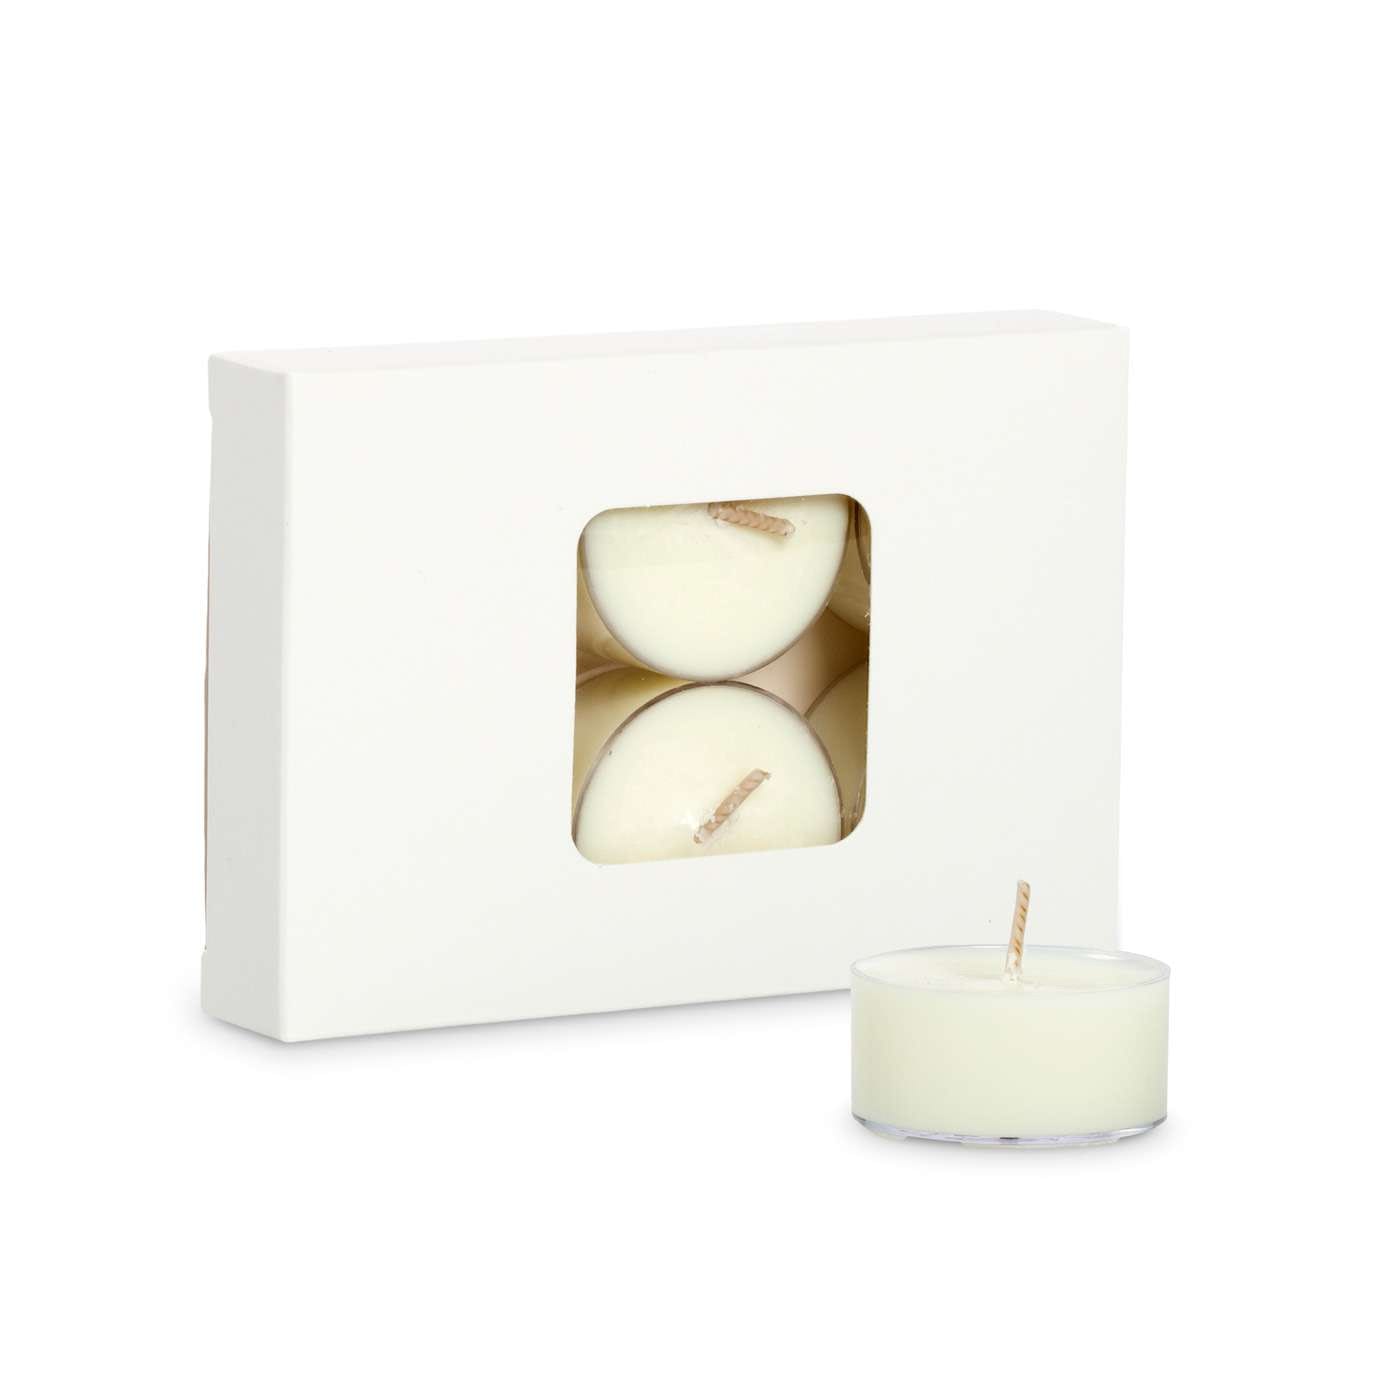 Unscented Pure Soy Wax Tea Light Candles – set of 6